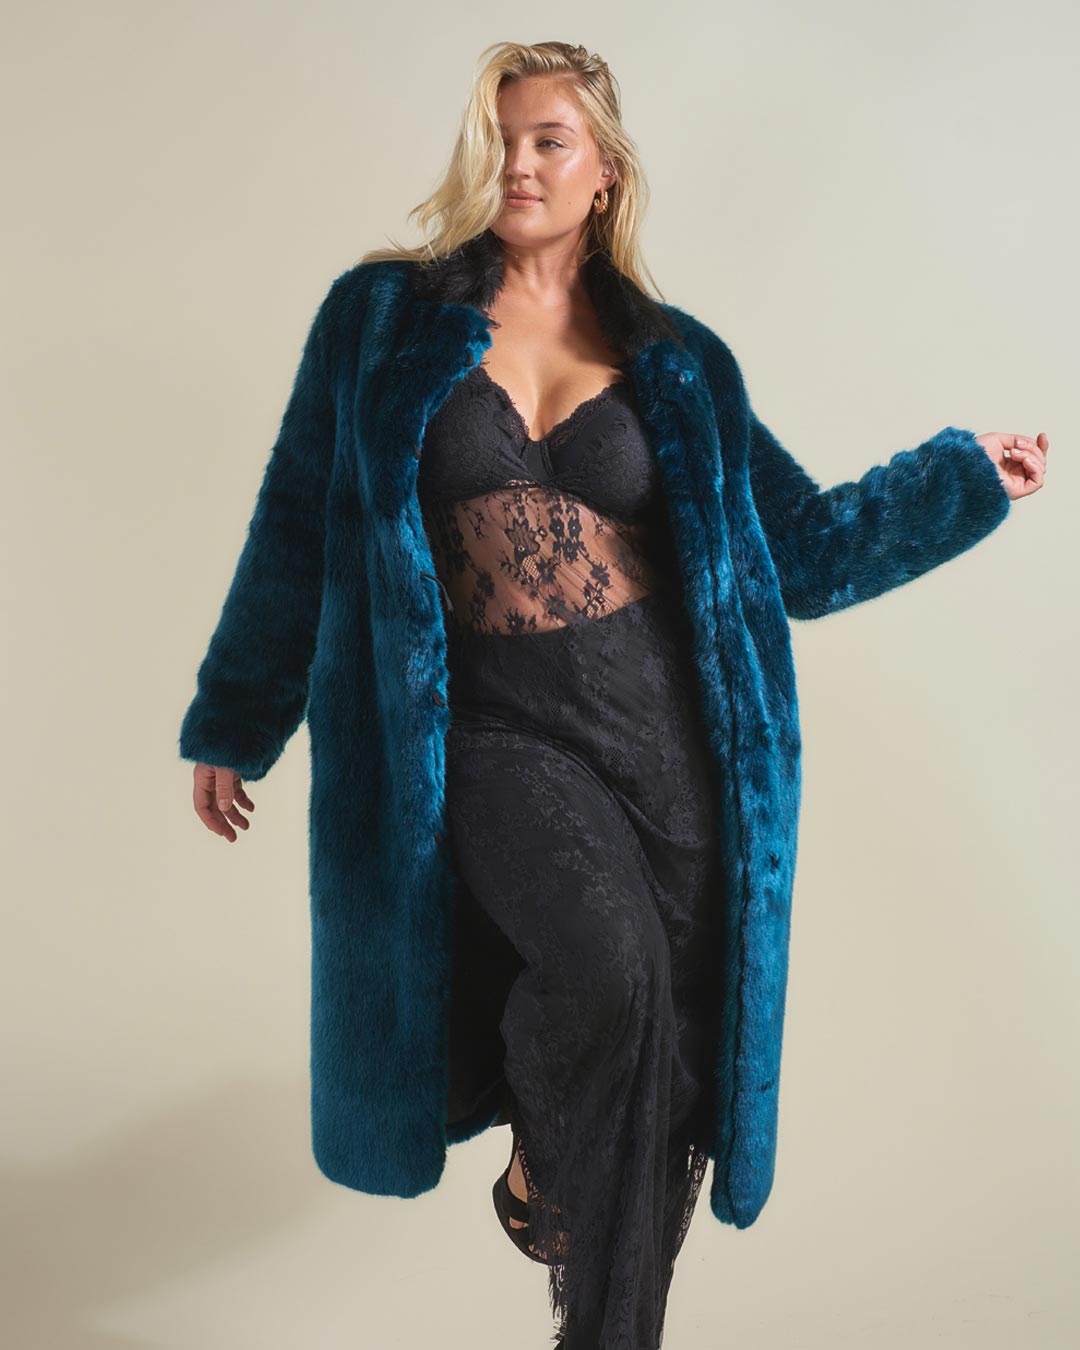 Teal Royal Wolf Luxe Calf Length Faux Fur Coat on Female